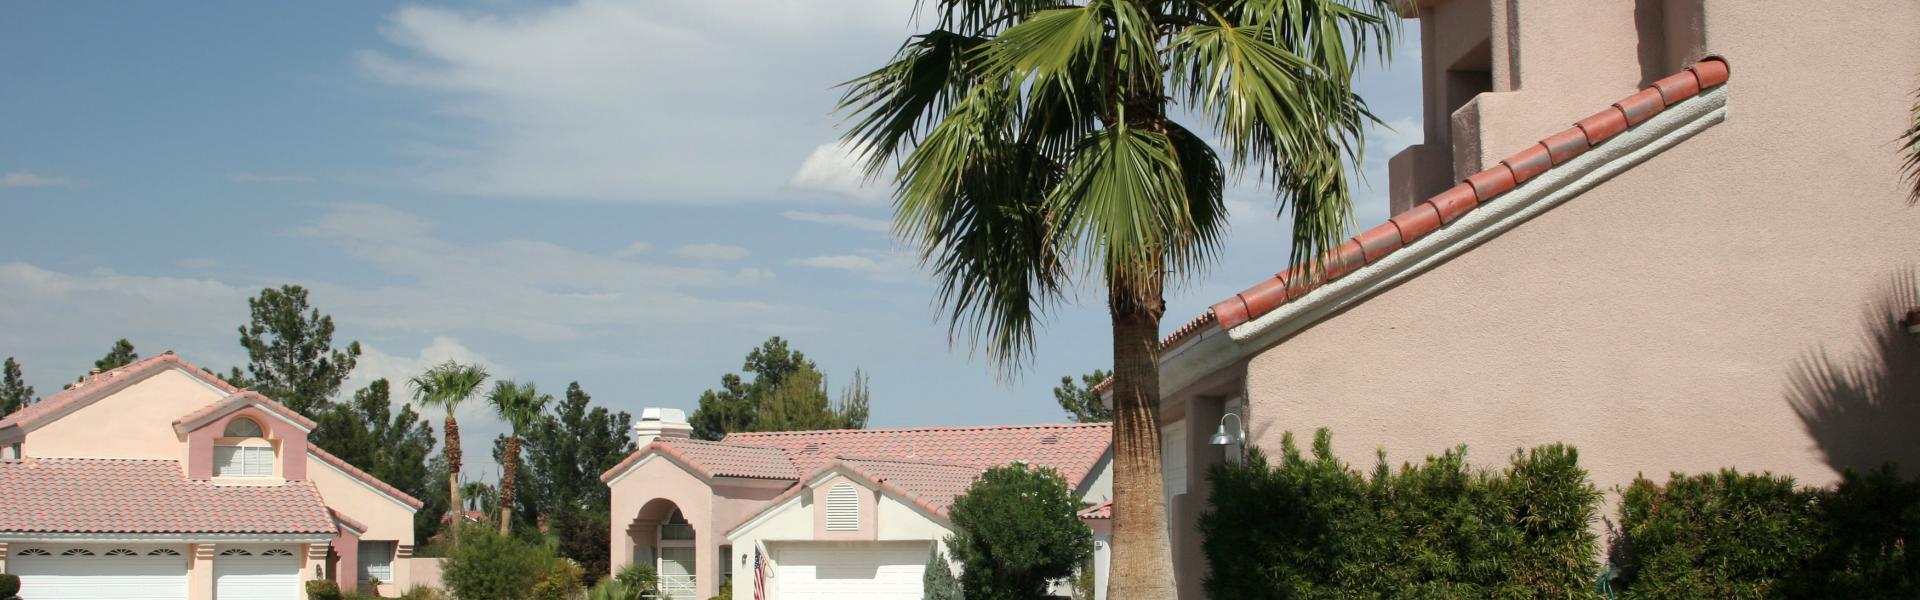 Find the perfect vacation home in Nevada - Casamundo